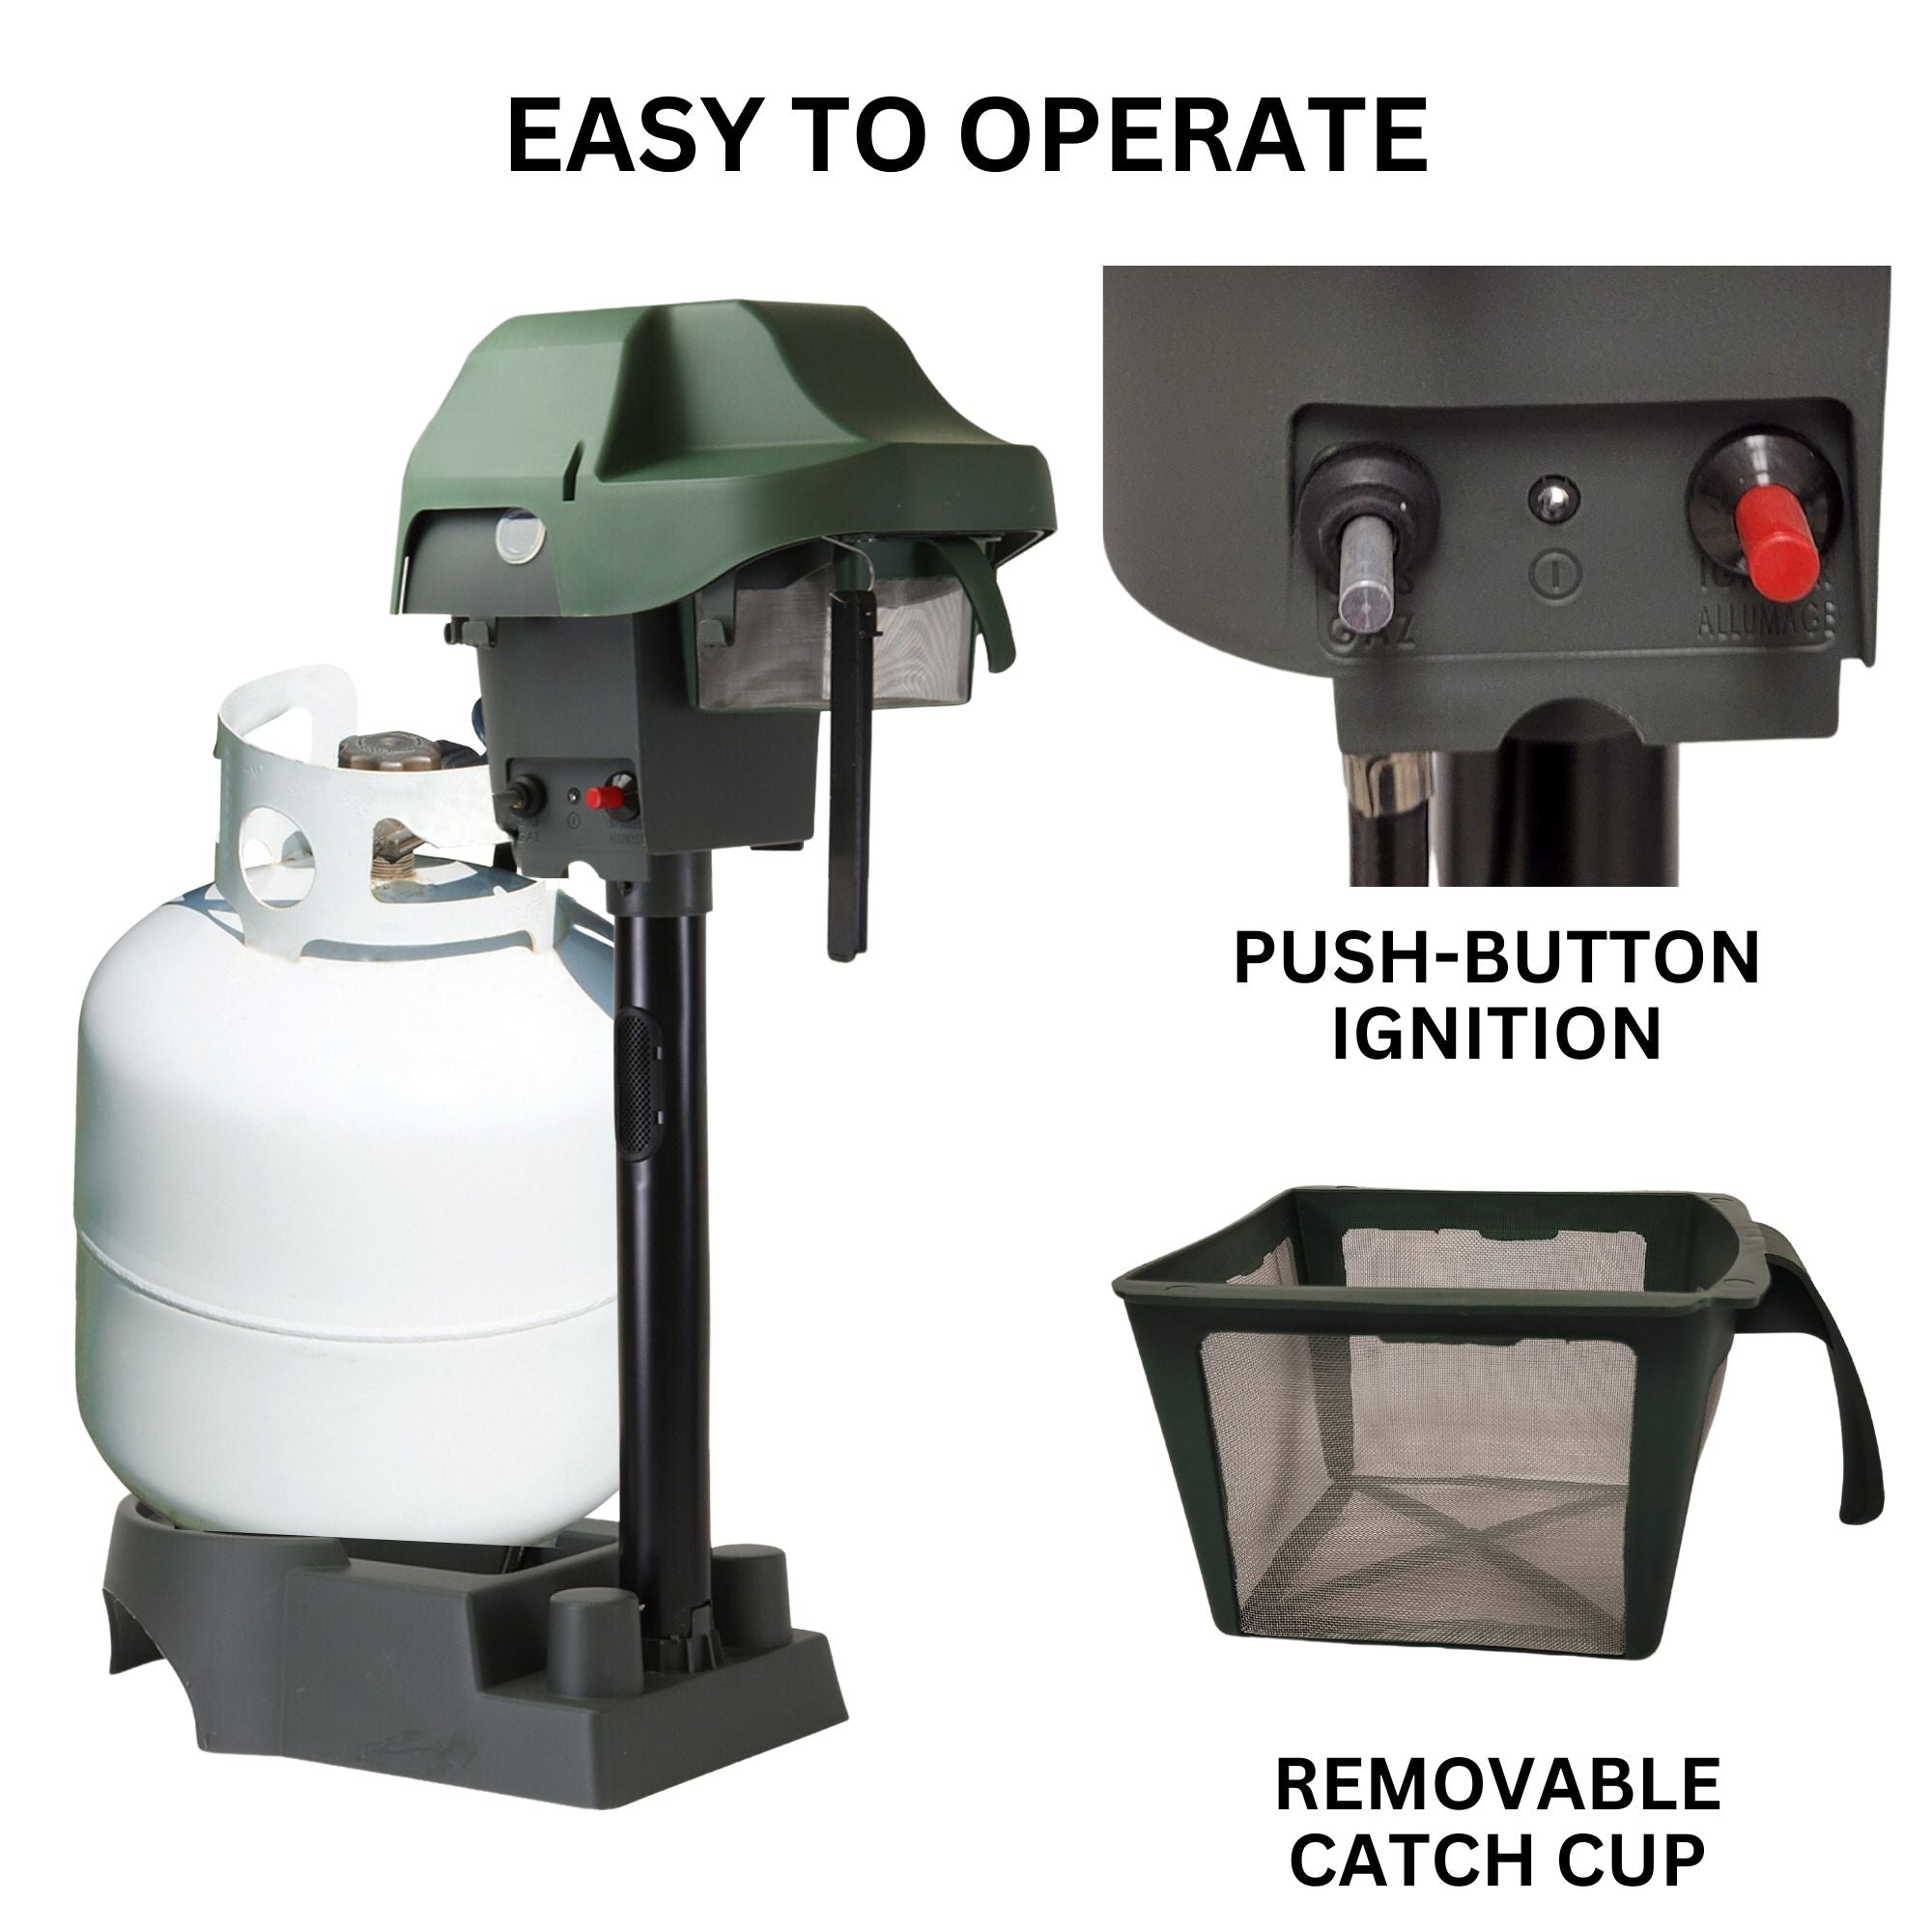 Bite Shield mosquito trap on a white background with labeled closeup images of features to the right: Push-button ignition; removable catch cup. Text above reads, "Easy to operate"